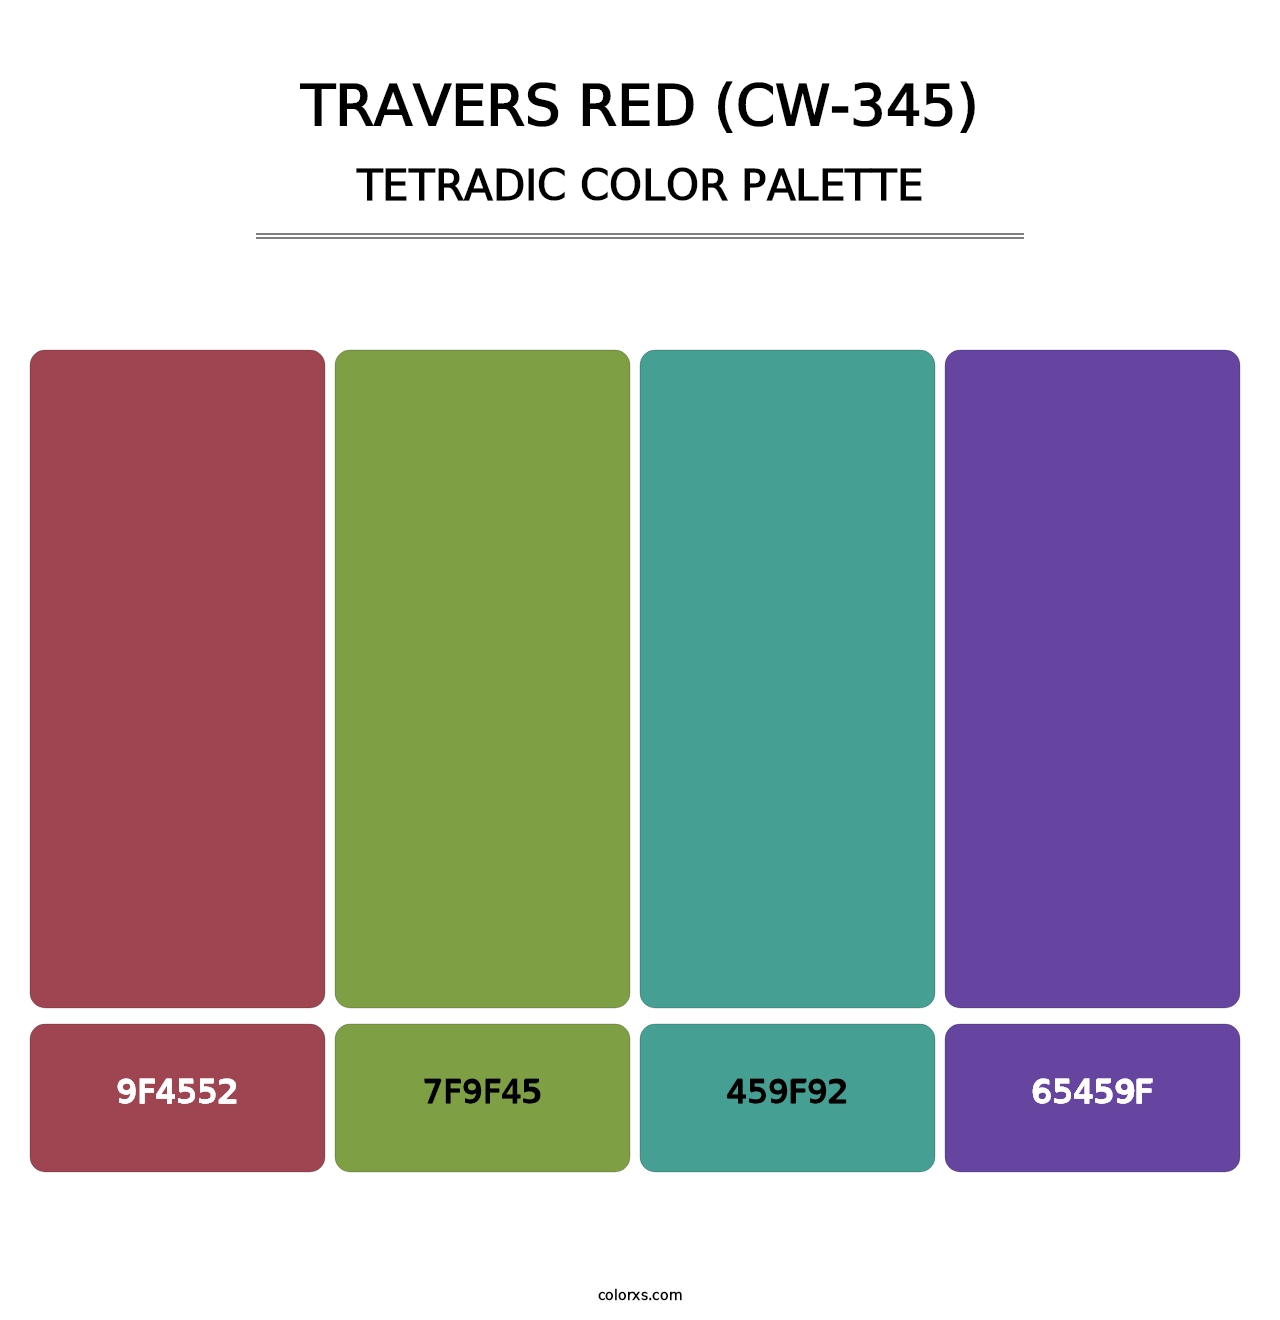 Travers Red (CW-345) - Tetradic Color Palette